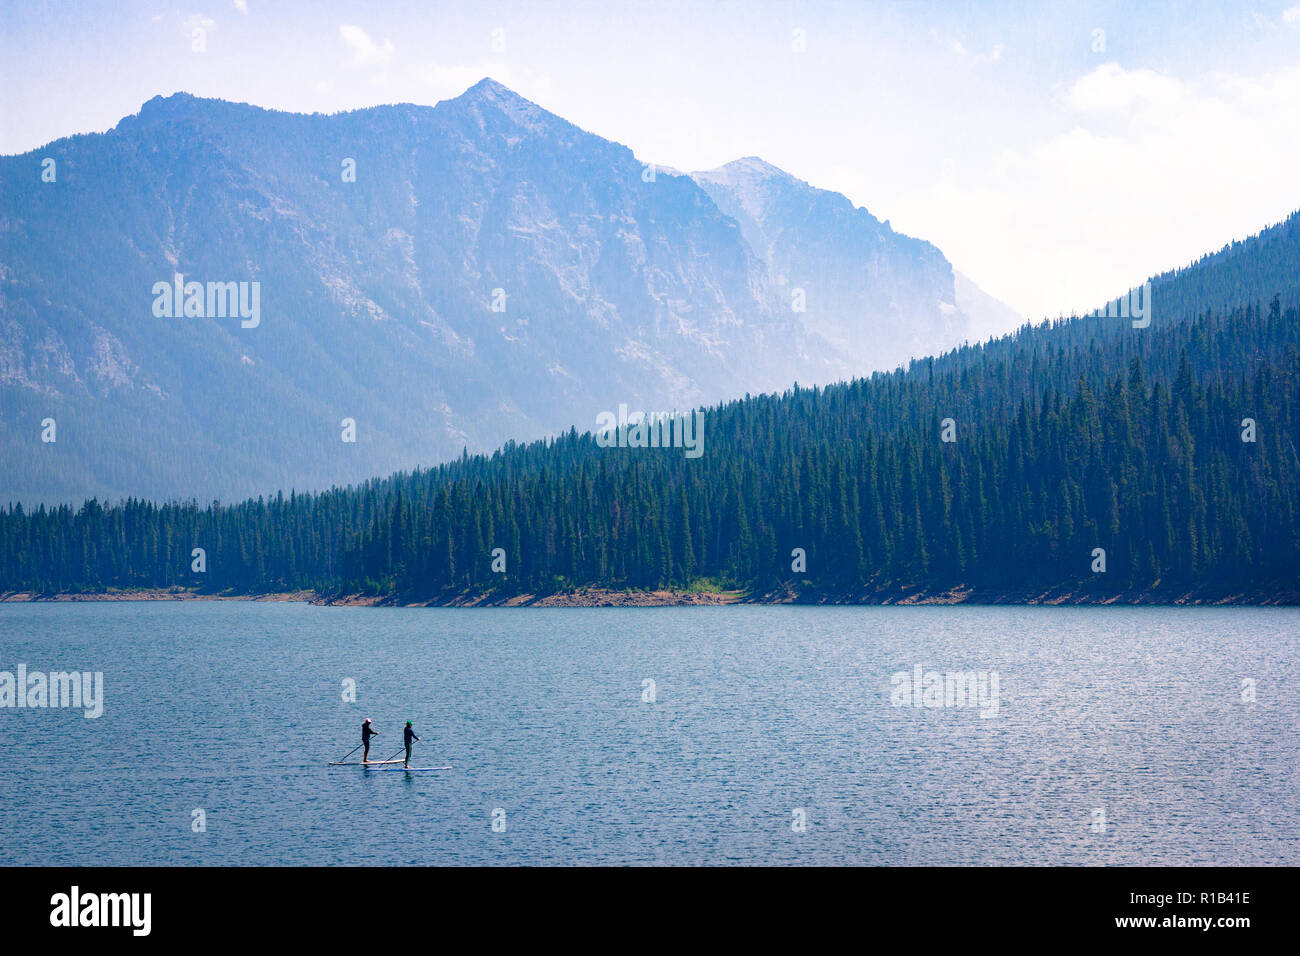 Mountain Lake Recreation. Paddle boarders drift through the Hyalite Reservoir in Montana. Relaxing outdoors vacation scene with majestic copy space. Stock Photo